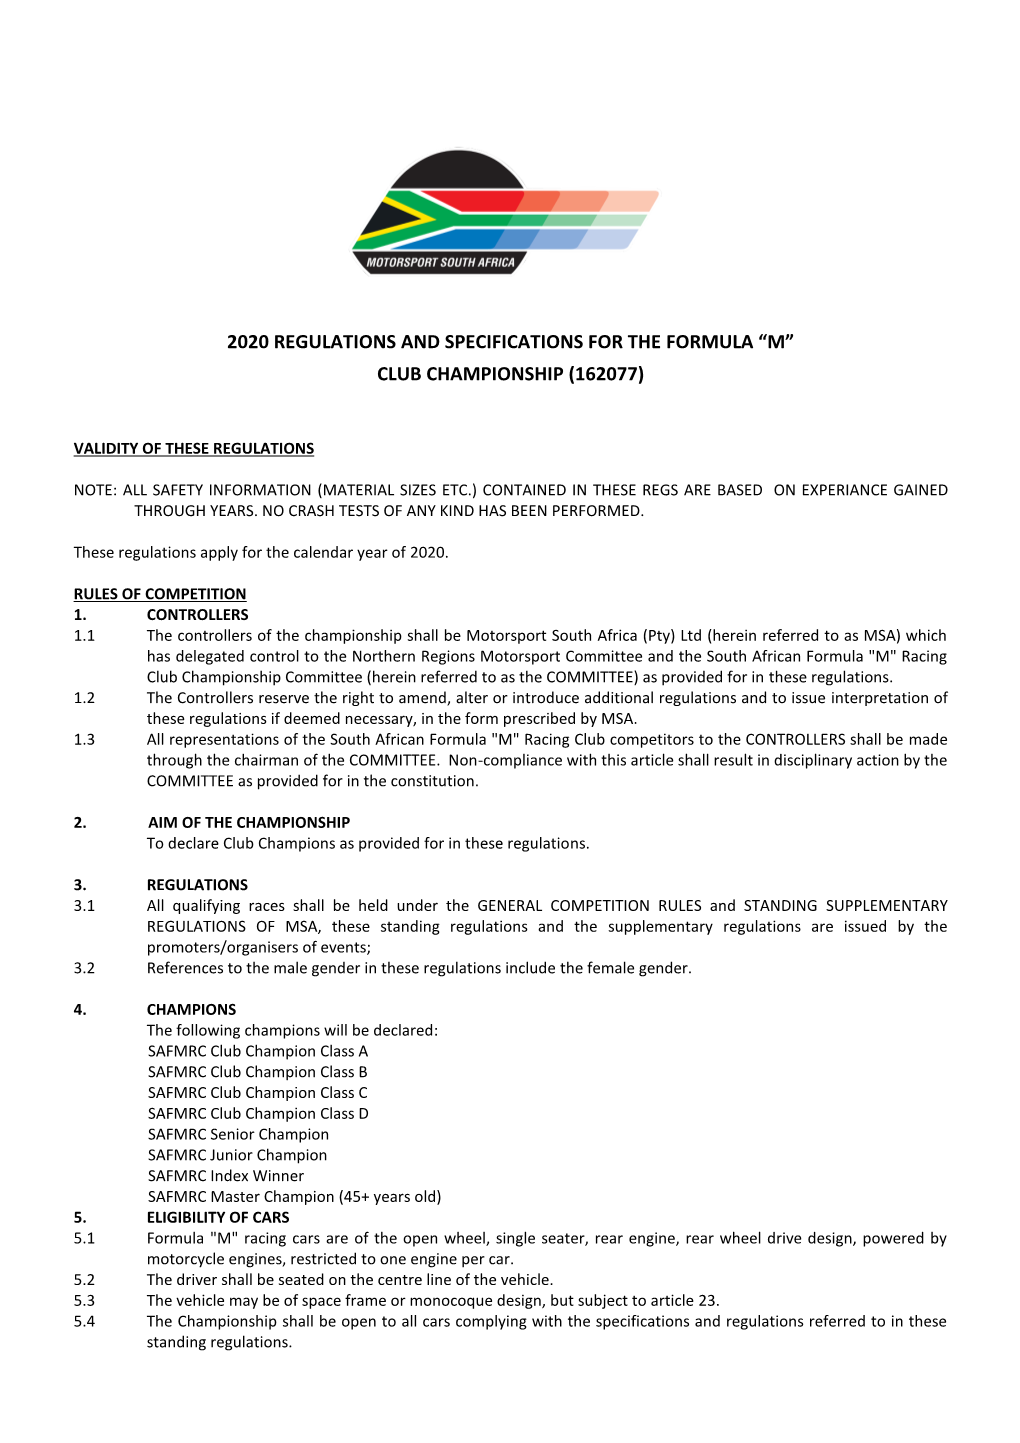 2020 Regulations and Specifications for the Formula “M” Club Championship (162077)